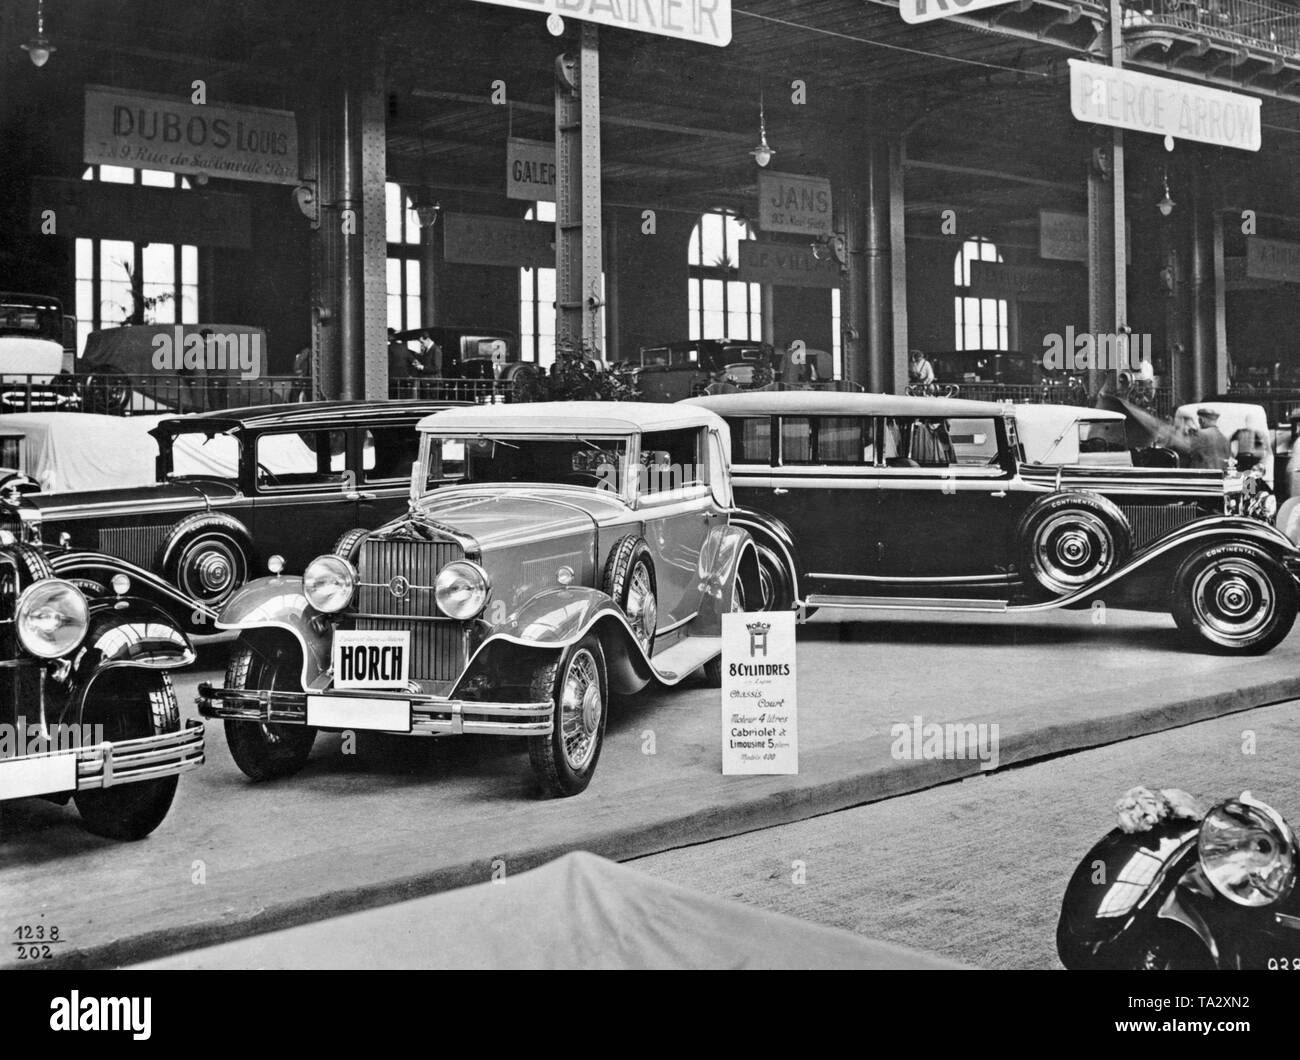 page 2 horch high resolution stock photography and images alamy https www alamy com a horch 8 at a motor show in 1930 the horch 8 was the first german production vehicle with eight cylinder engine image247156590 html